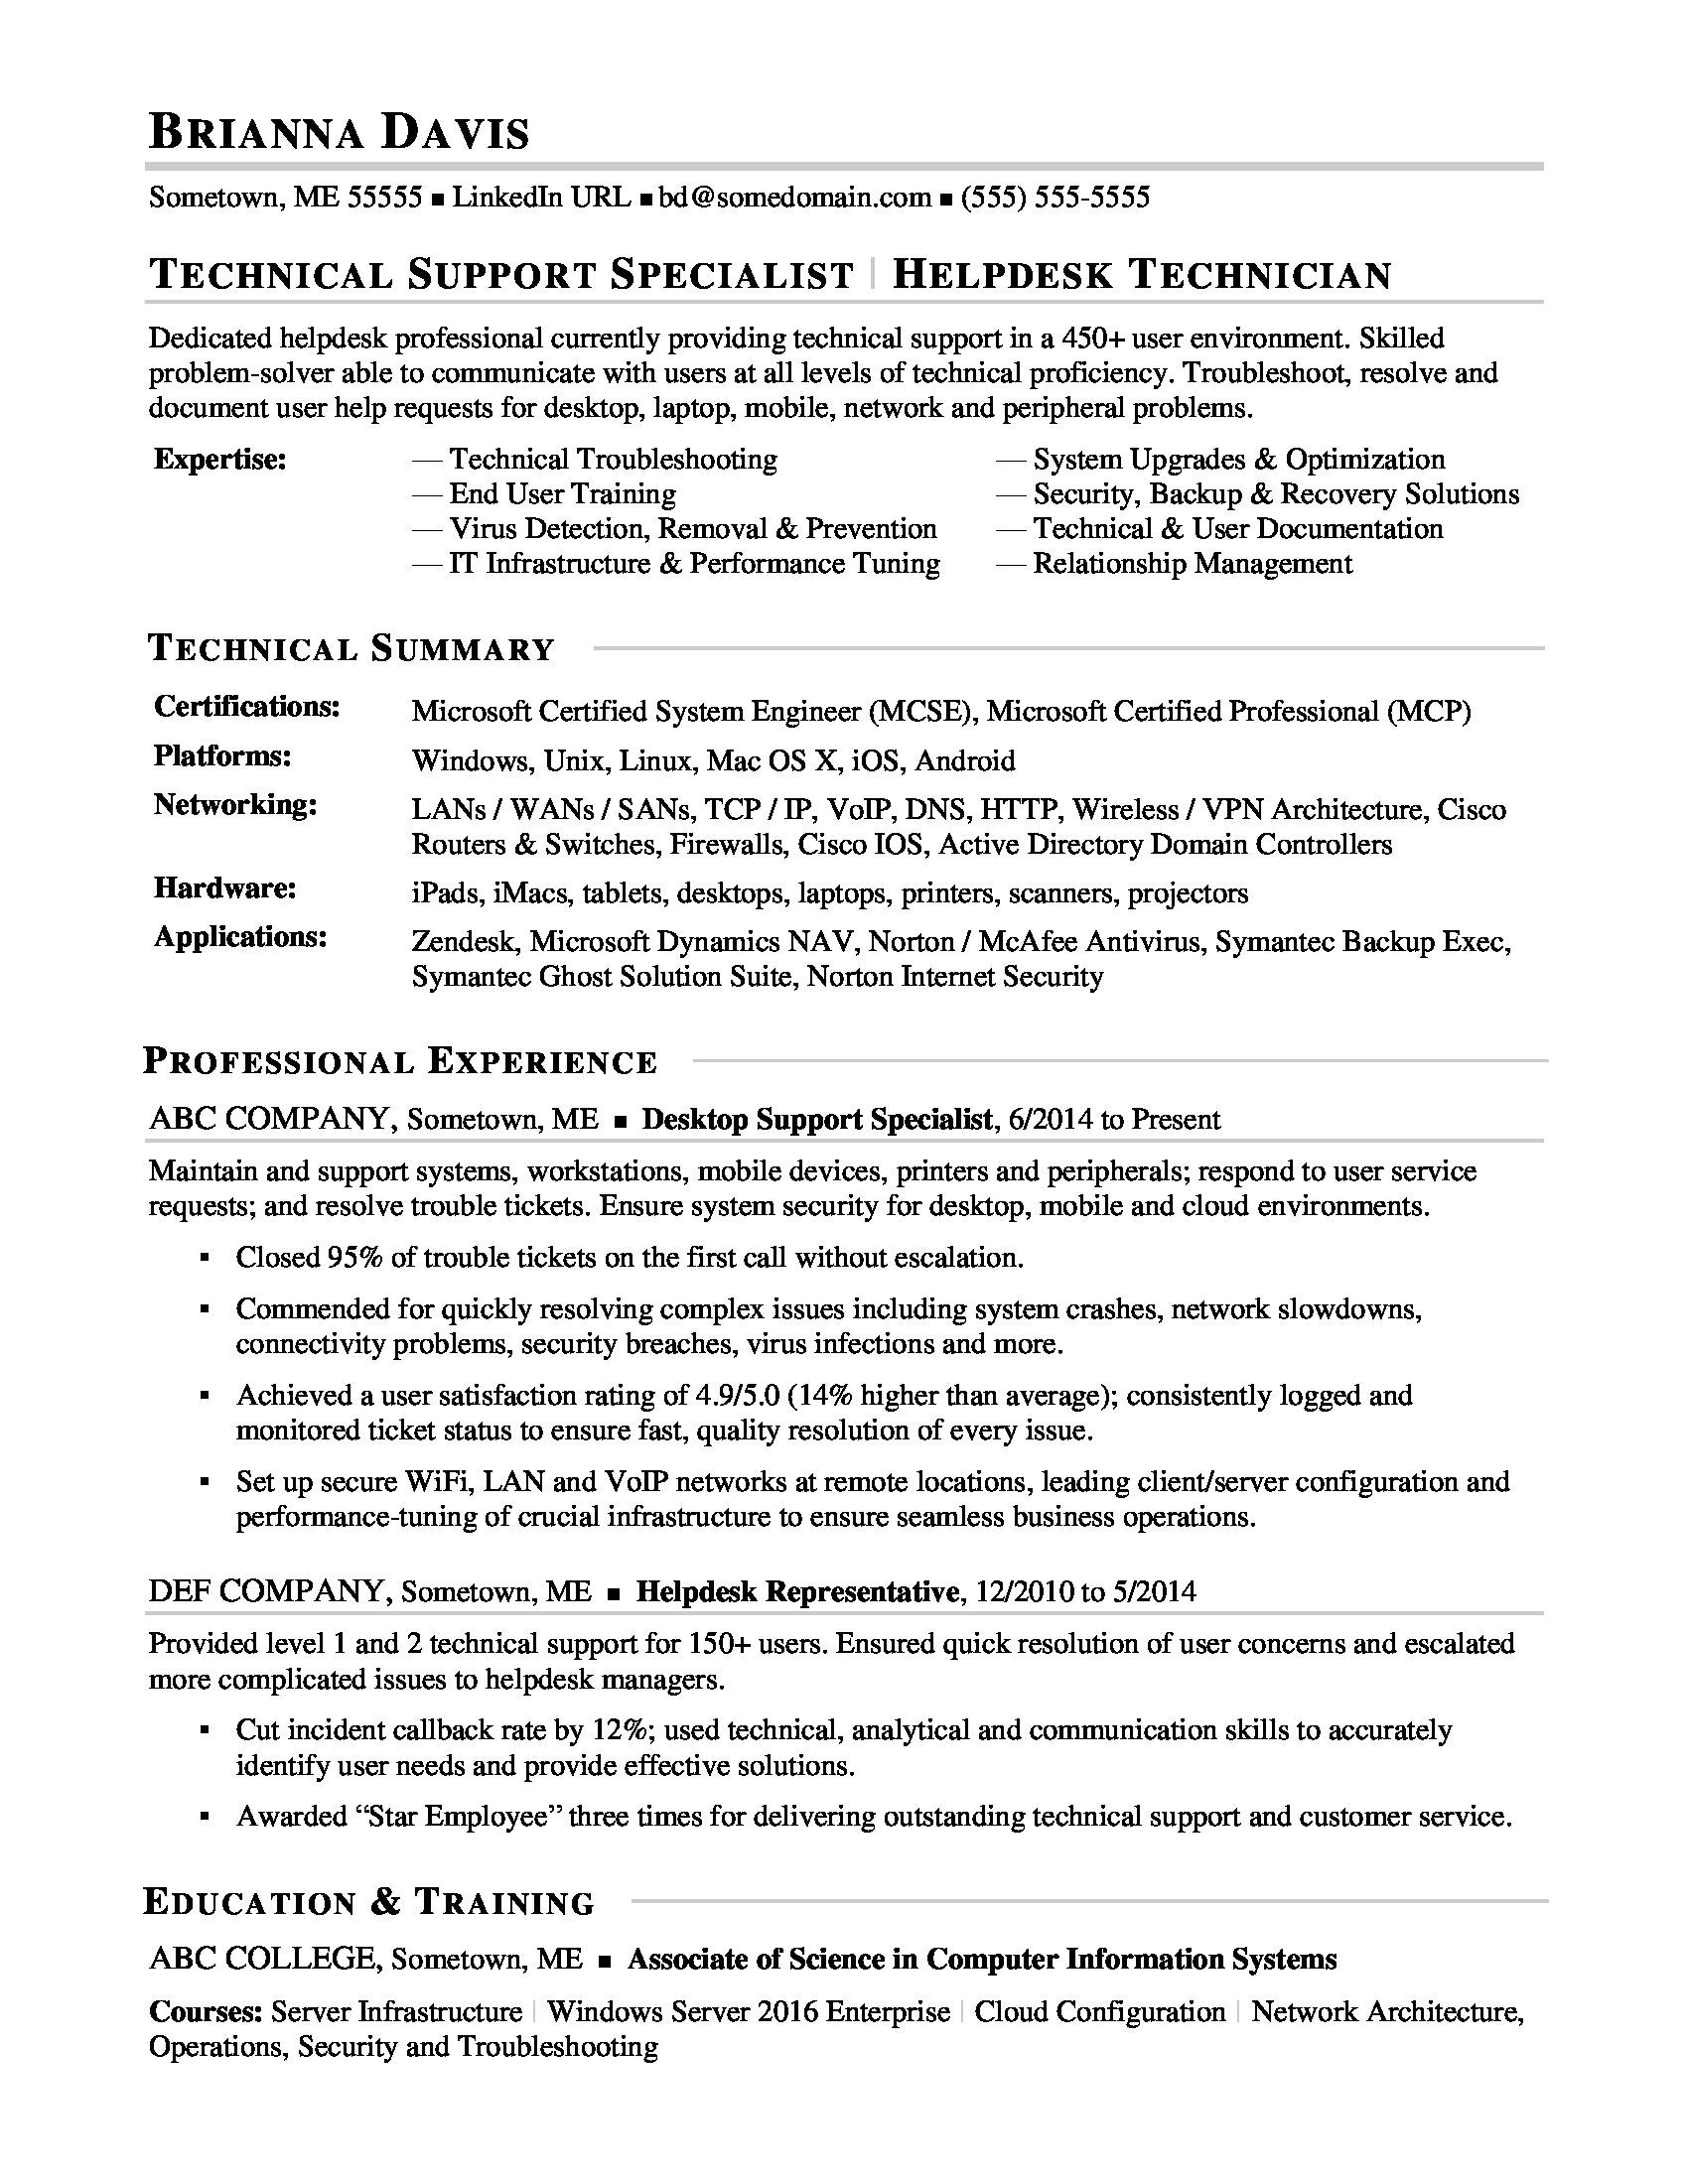 Sample Resume for Computer Technical Support Sample Resume for Experienced It Help Desk Employee Monster.com